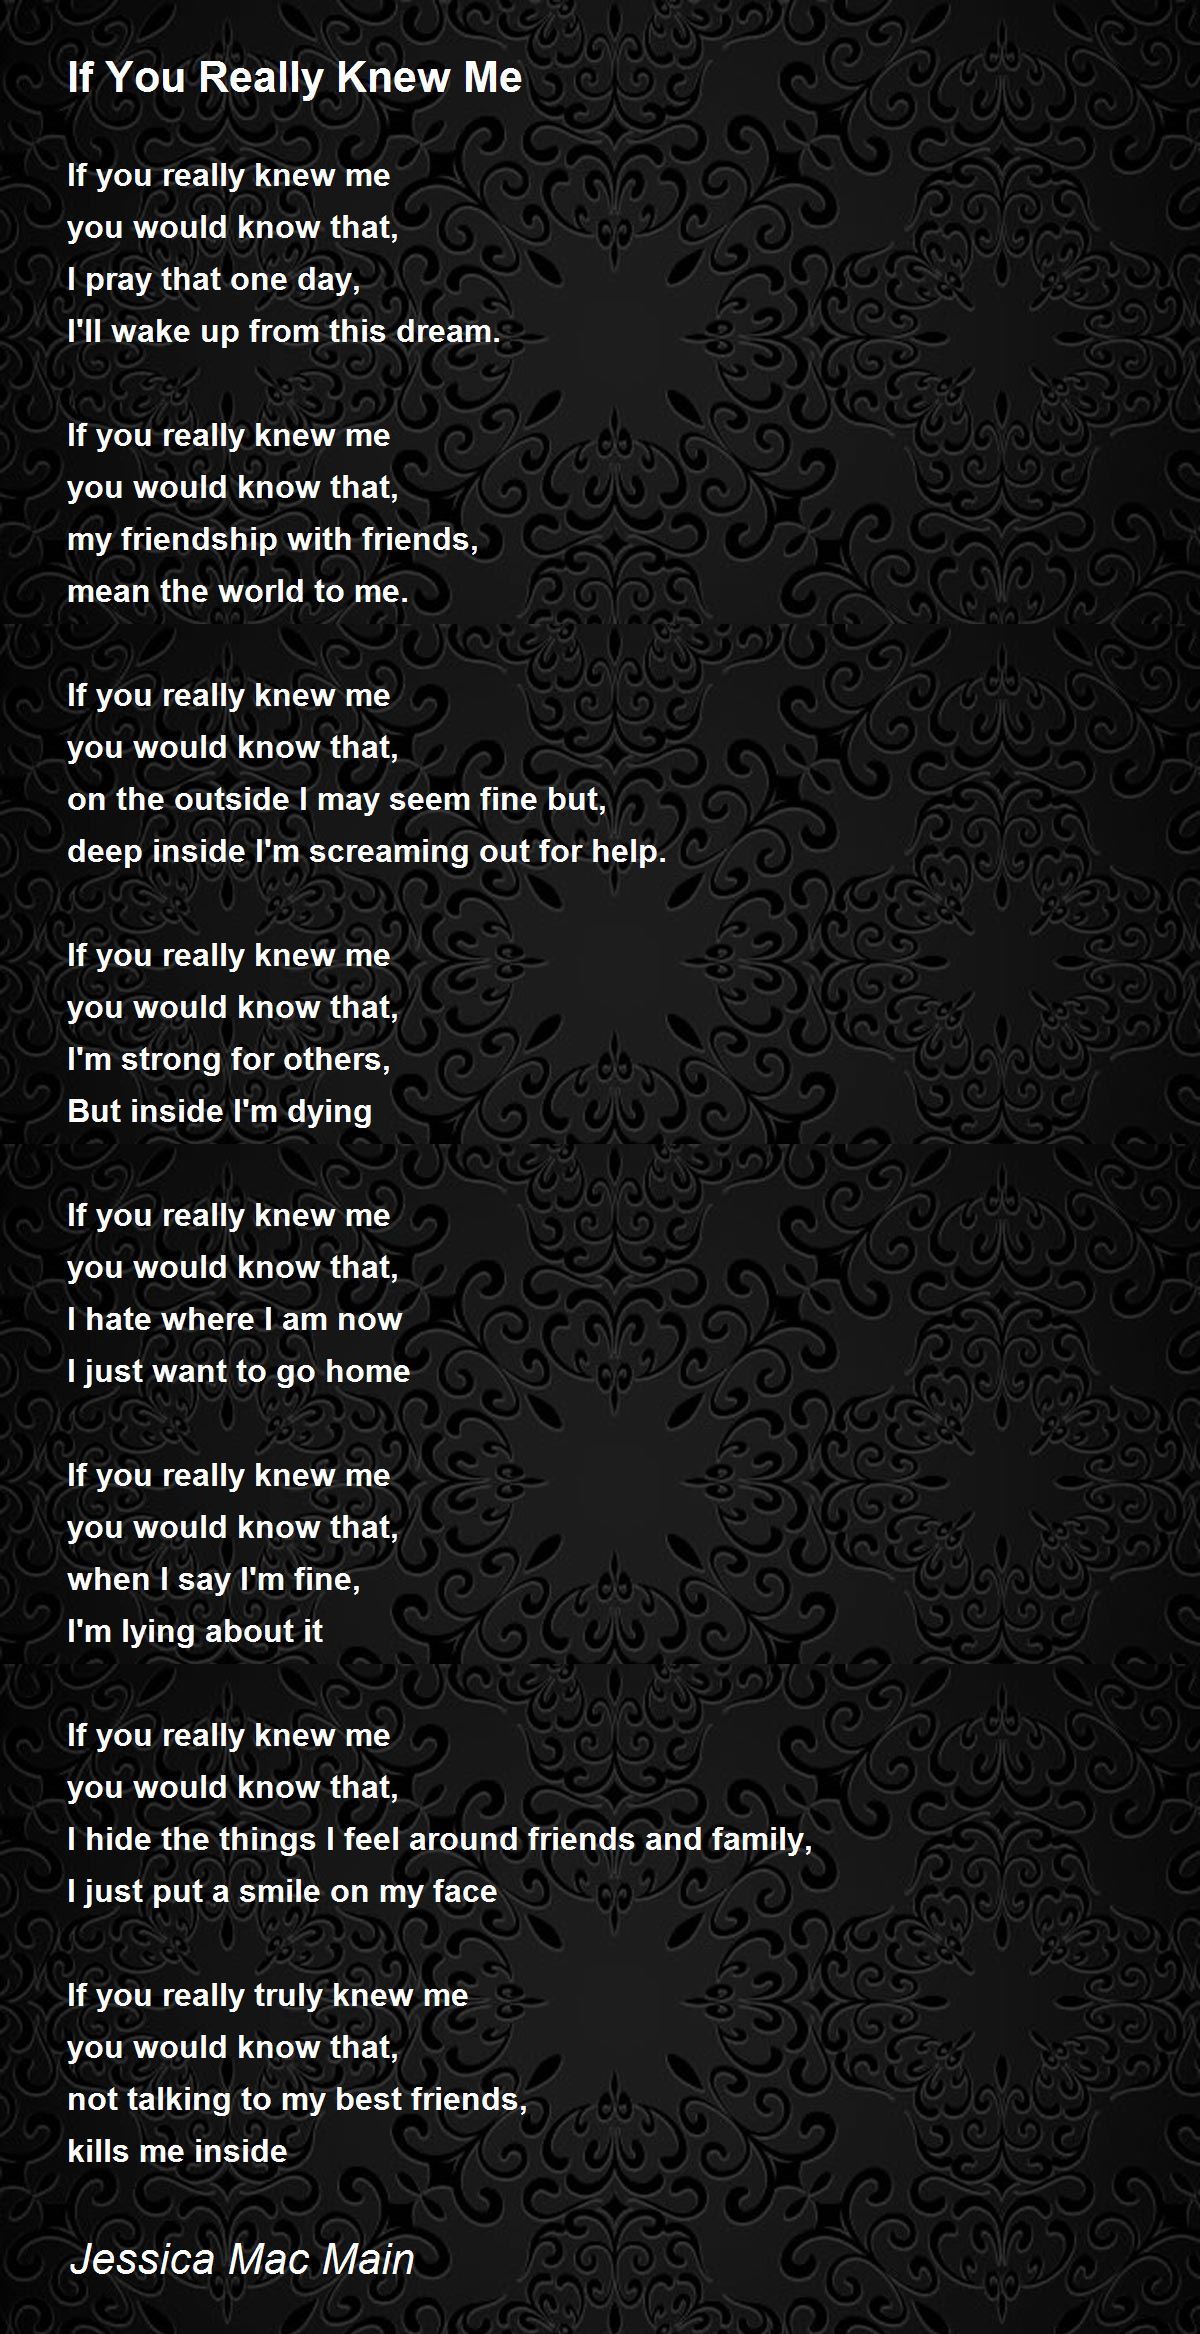 If You Really Knew Me Poem By Jessica Mac Main Poem Hunter